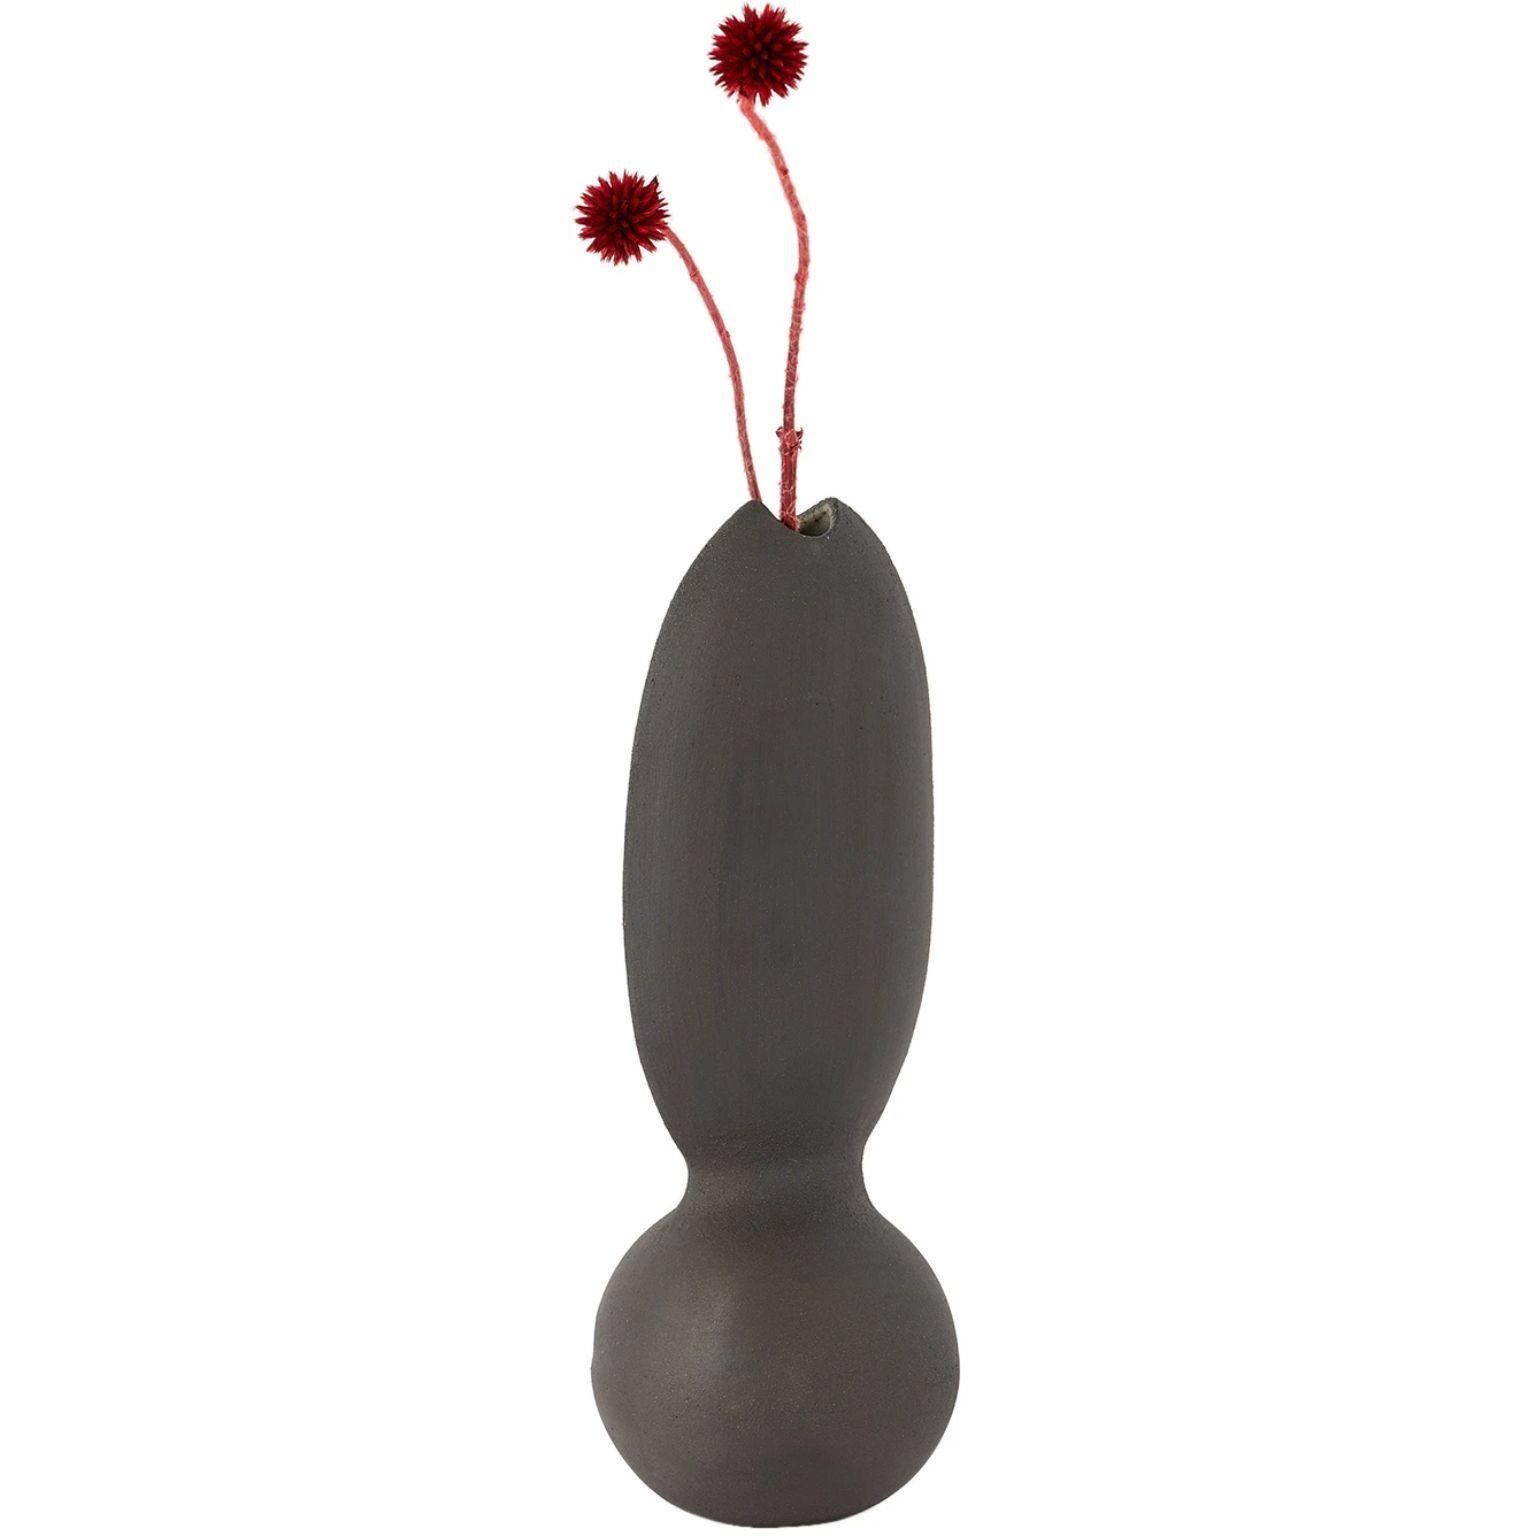 Itera Black Single Vase by Ia Kutateladze
One Of  A Kind.
Dimensions: D 10 x W 10 x H 27 cm.
Materials: Raw black clay.

Handcrafted sculptural ceramic vase in black. Please note coloration may vary. Each piece is one of a kind, due to its free